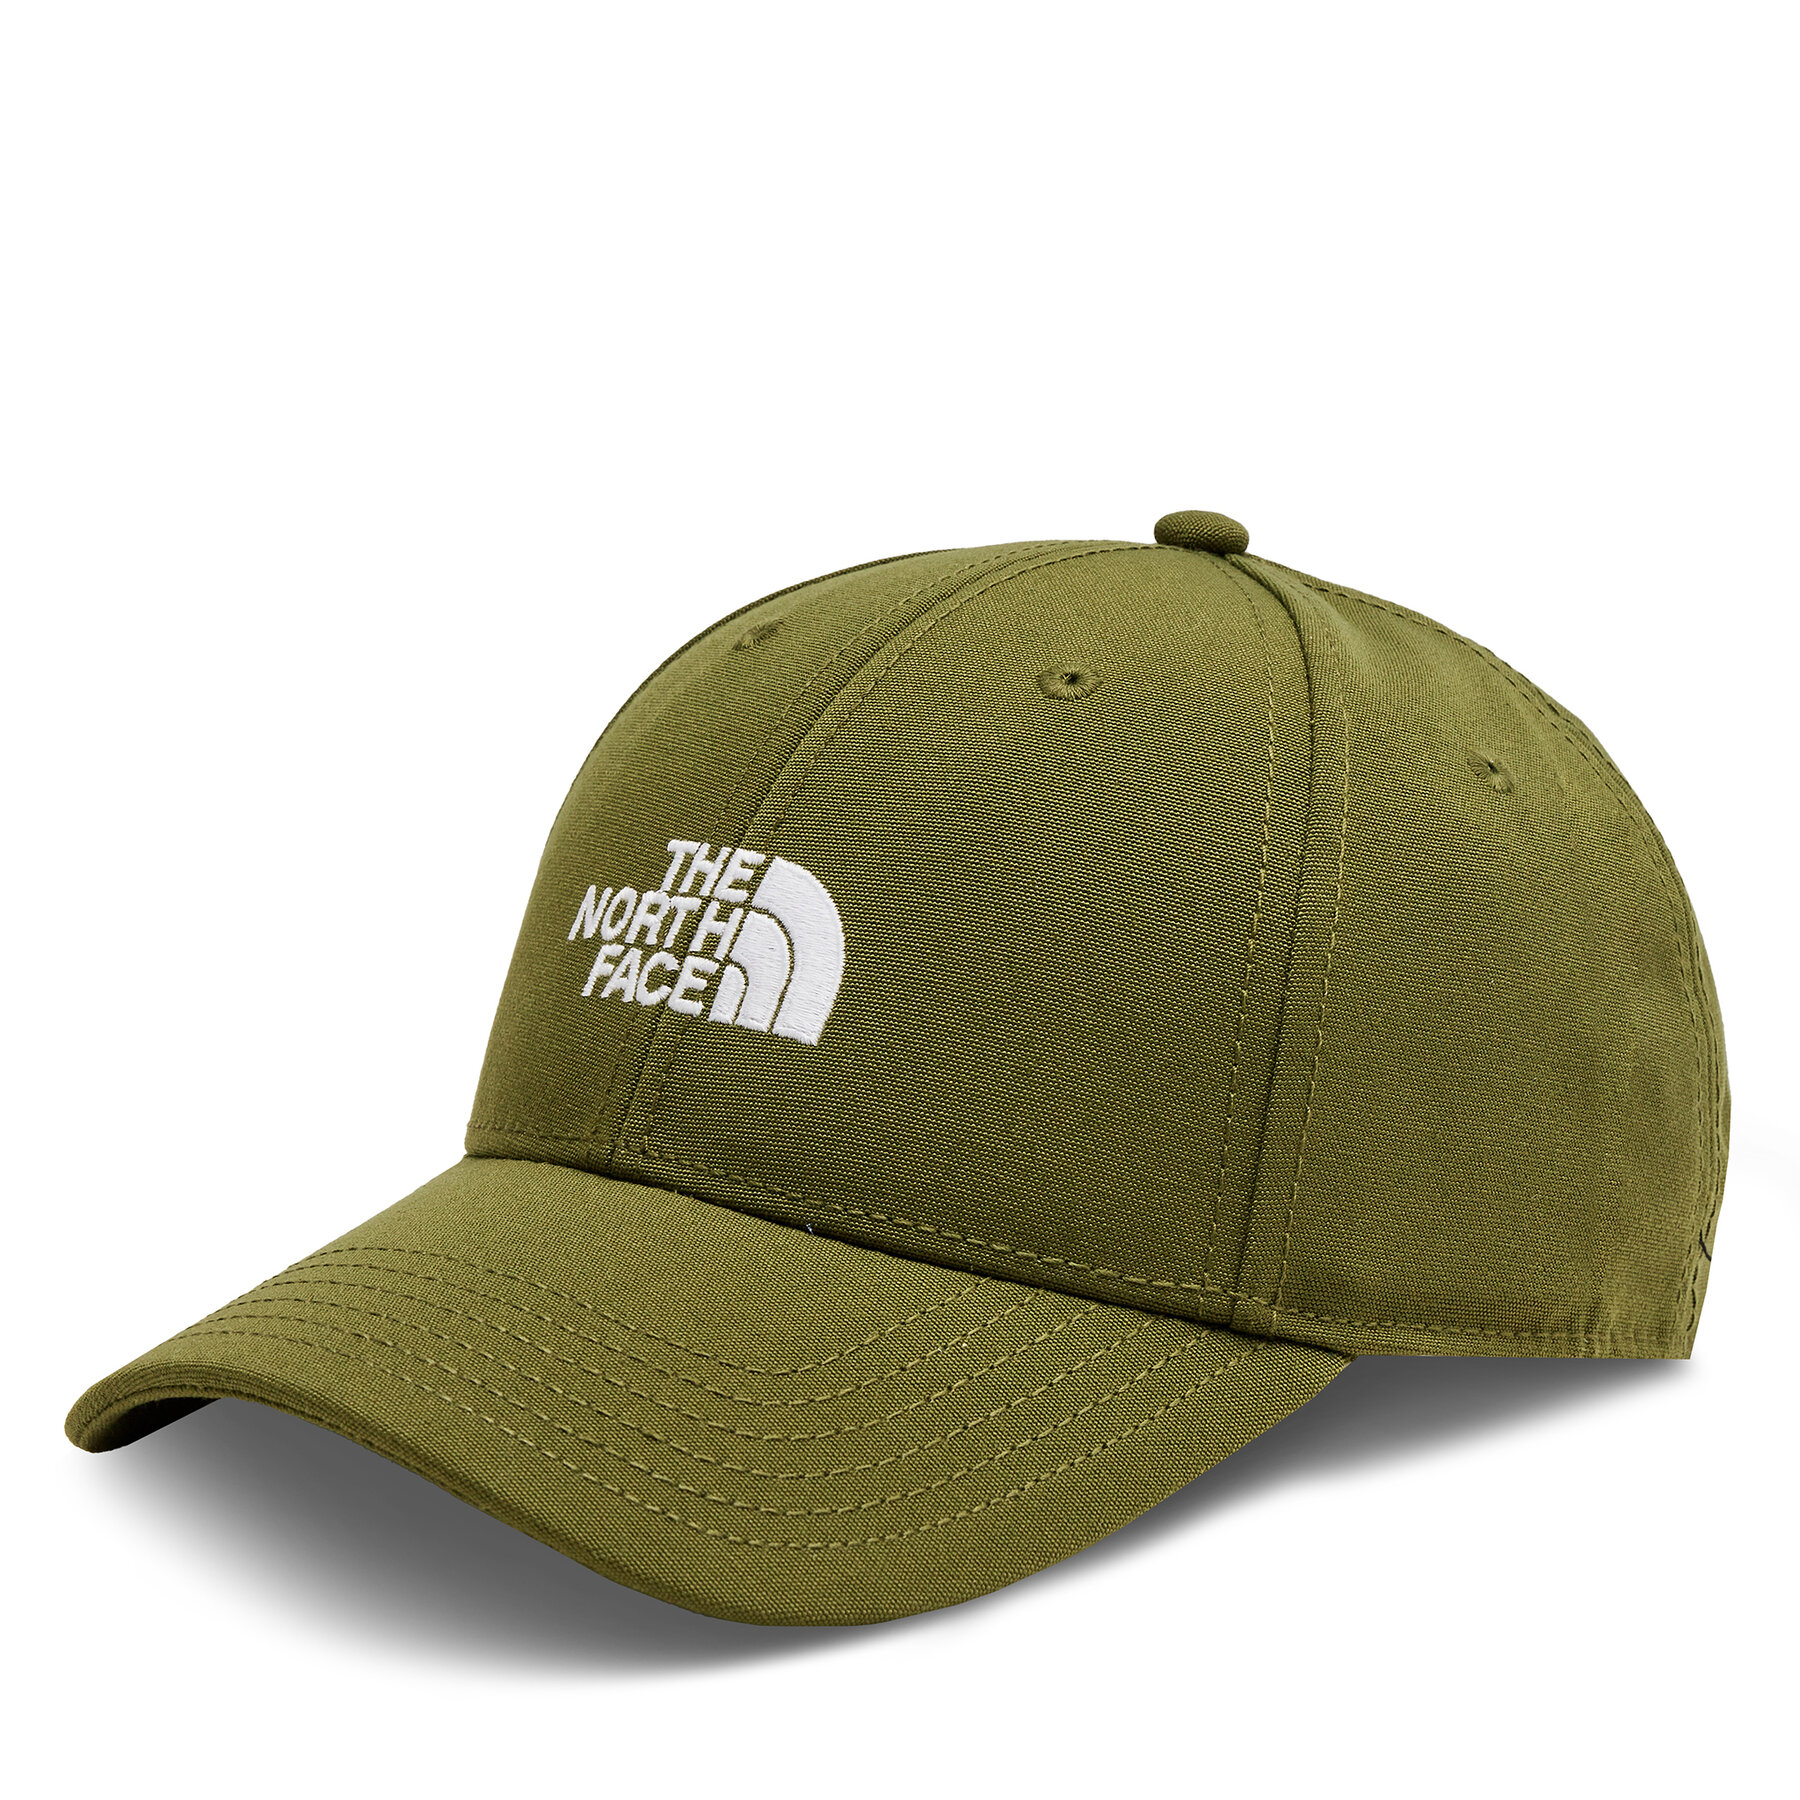 Cap The North Face 66 Classic Hat NF0A4VSVPIB1 Forest Olive von The North Face